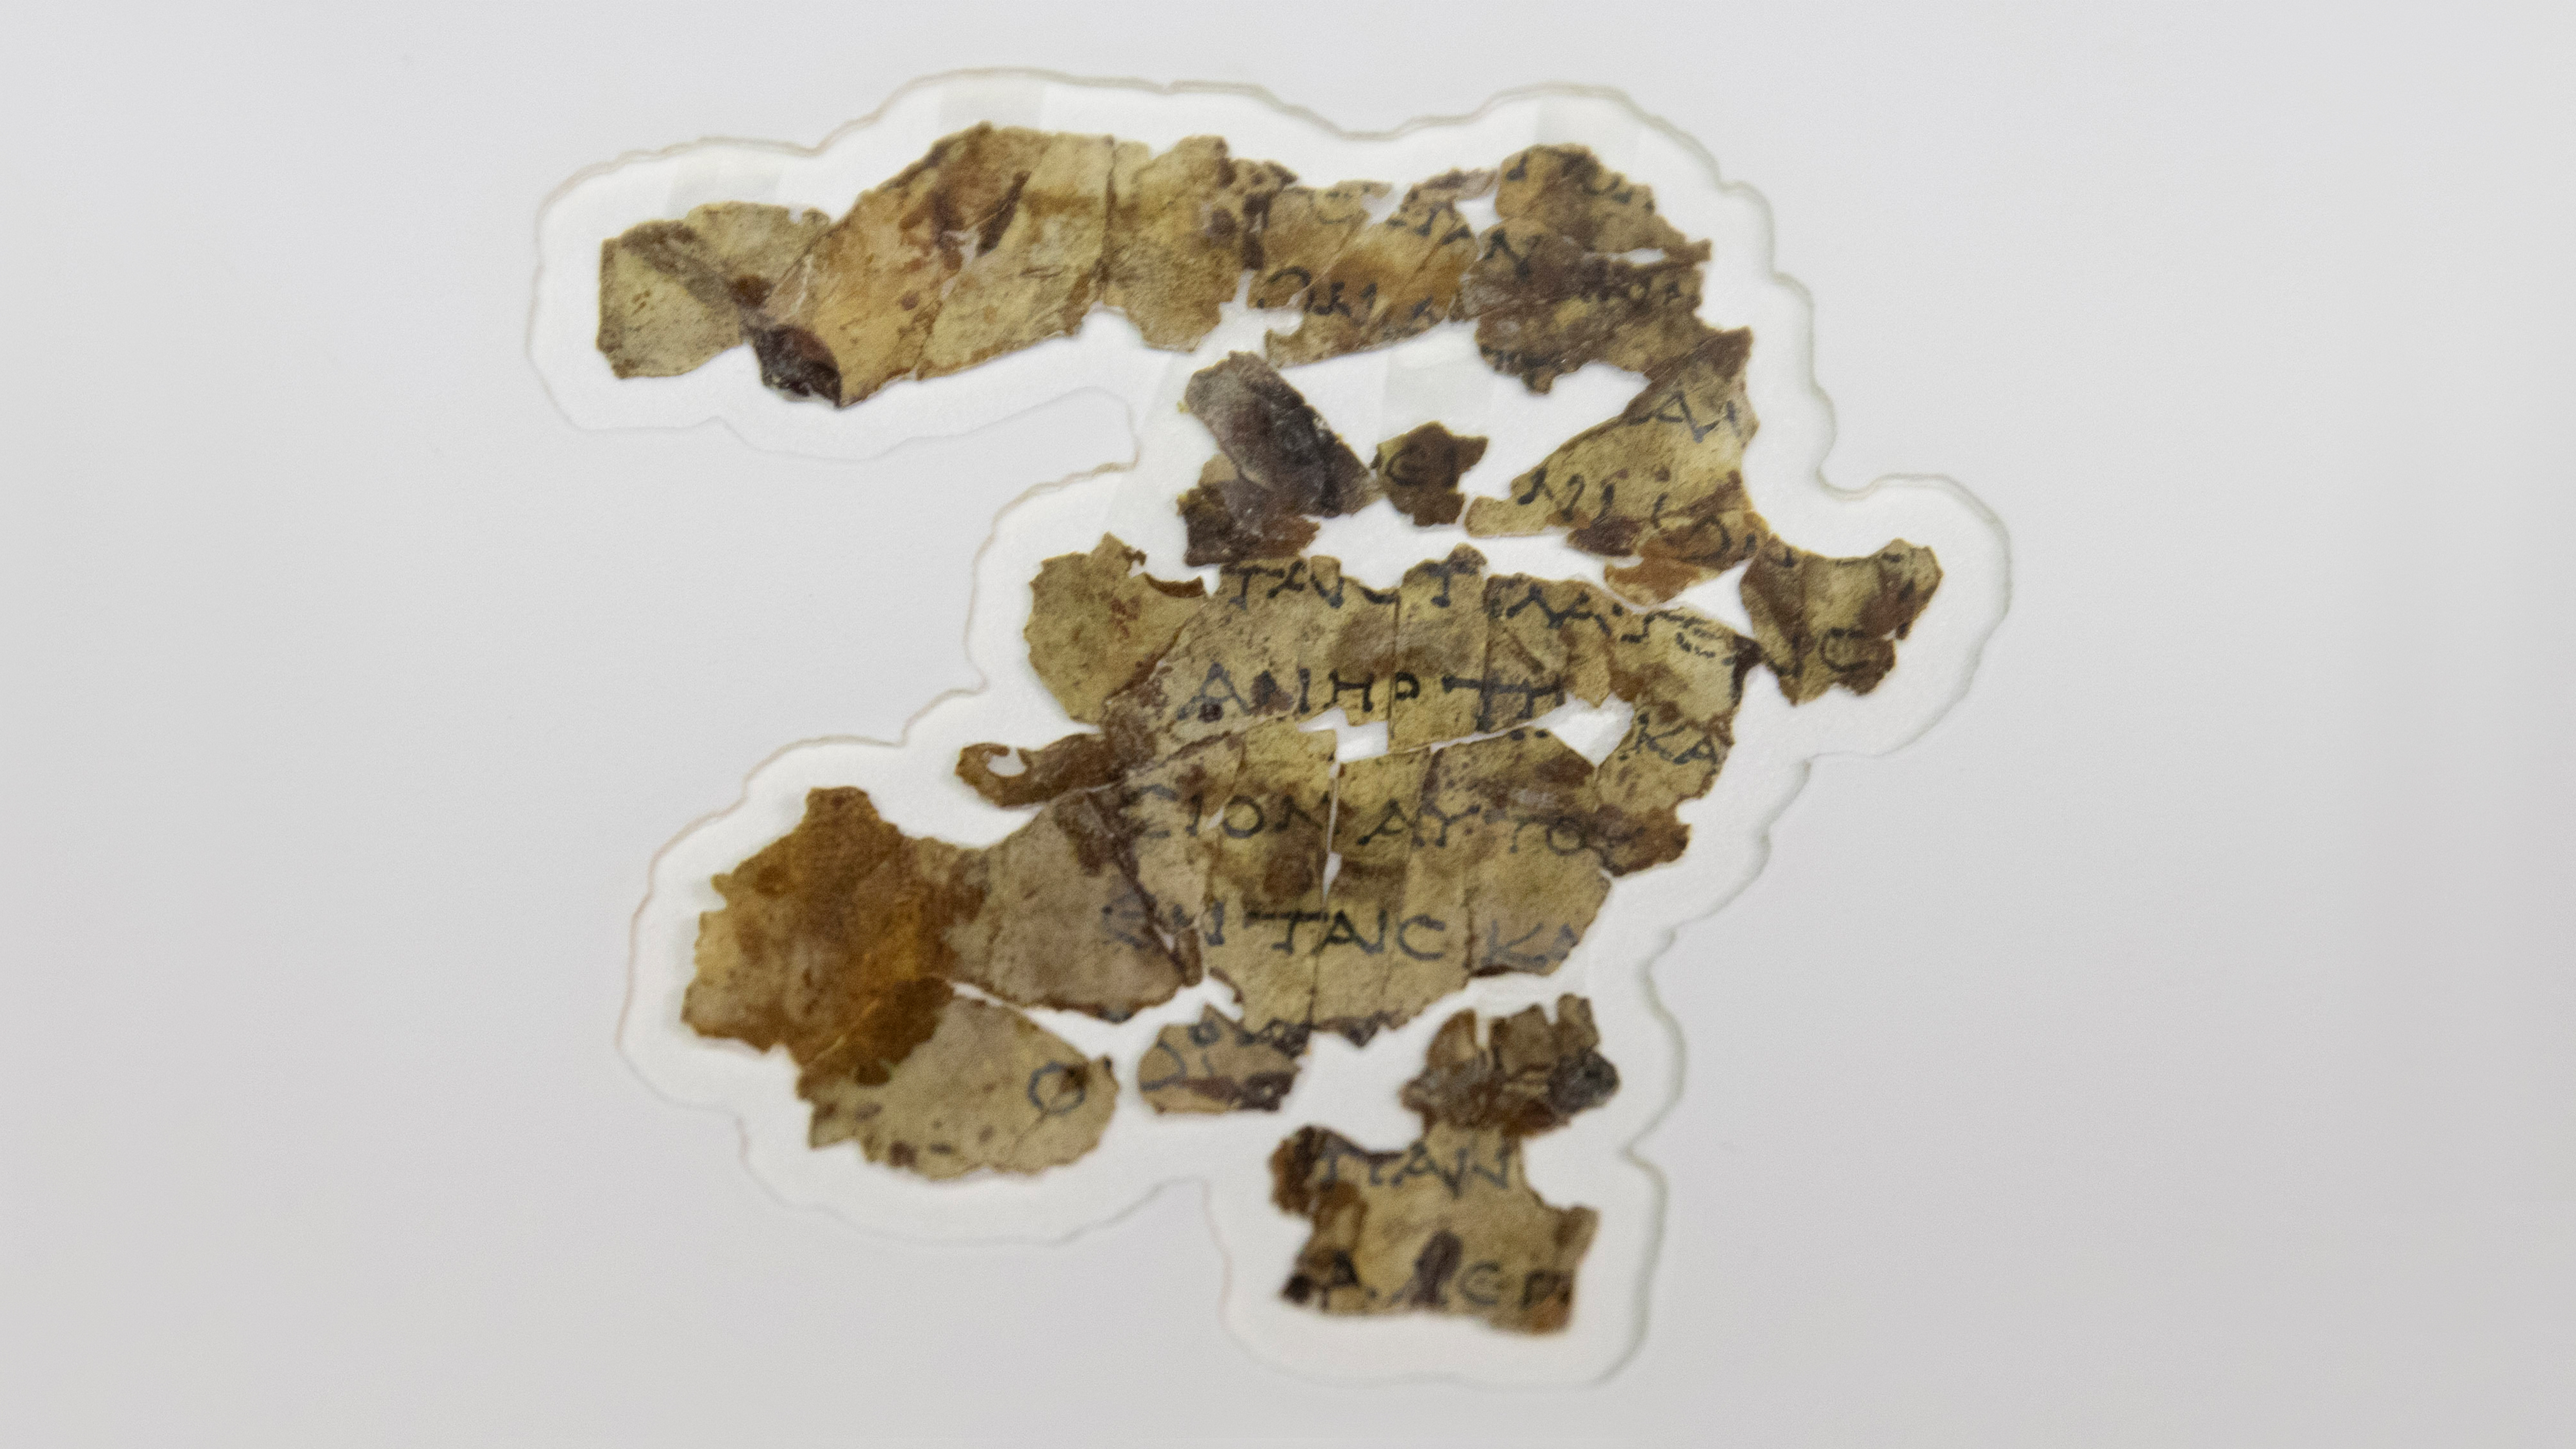 What the newly-discovered Dead Sea Scrolls tell us about history